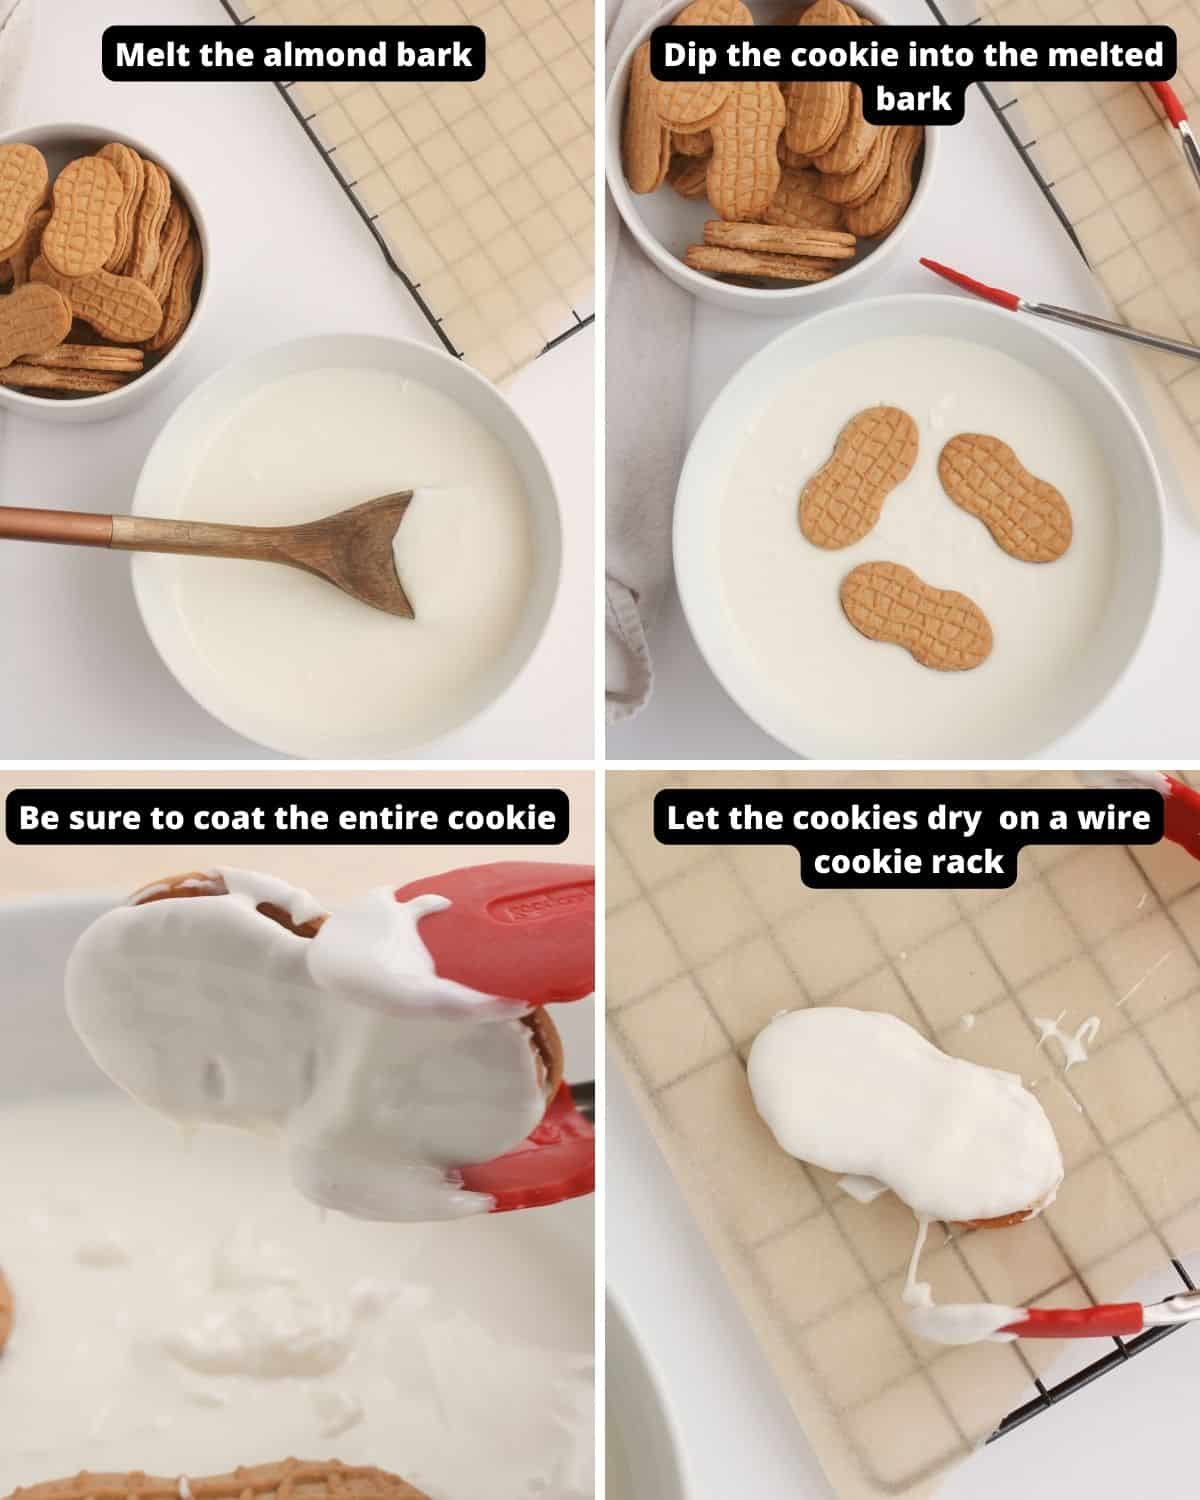 Step by step instructions with text overlay to make nutter butter mummy cookies.